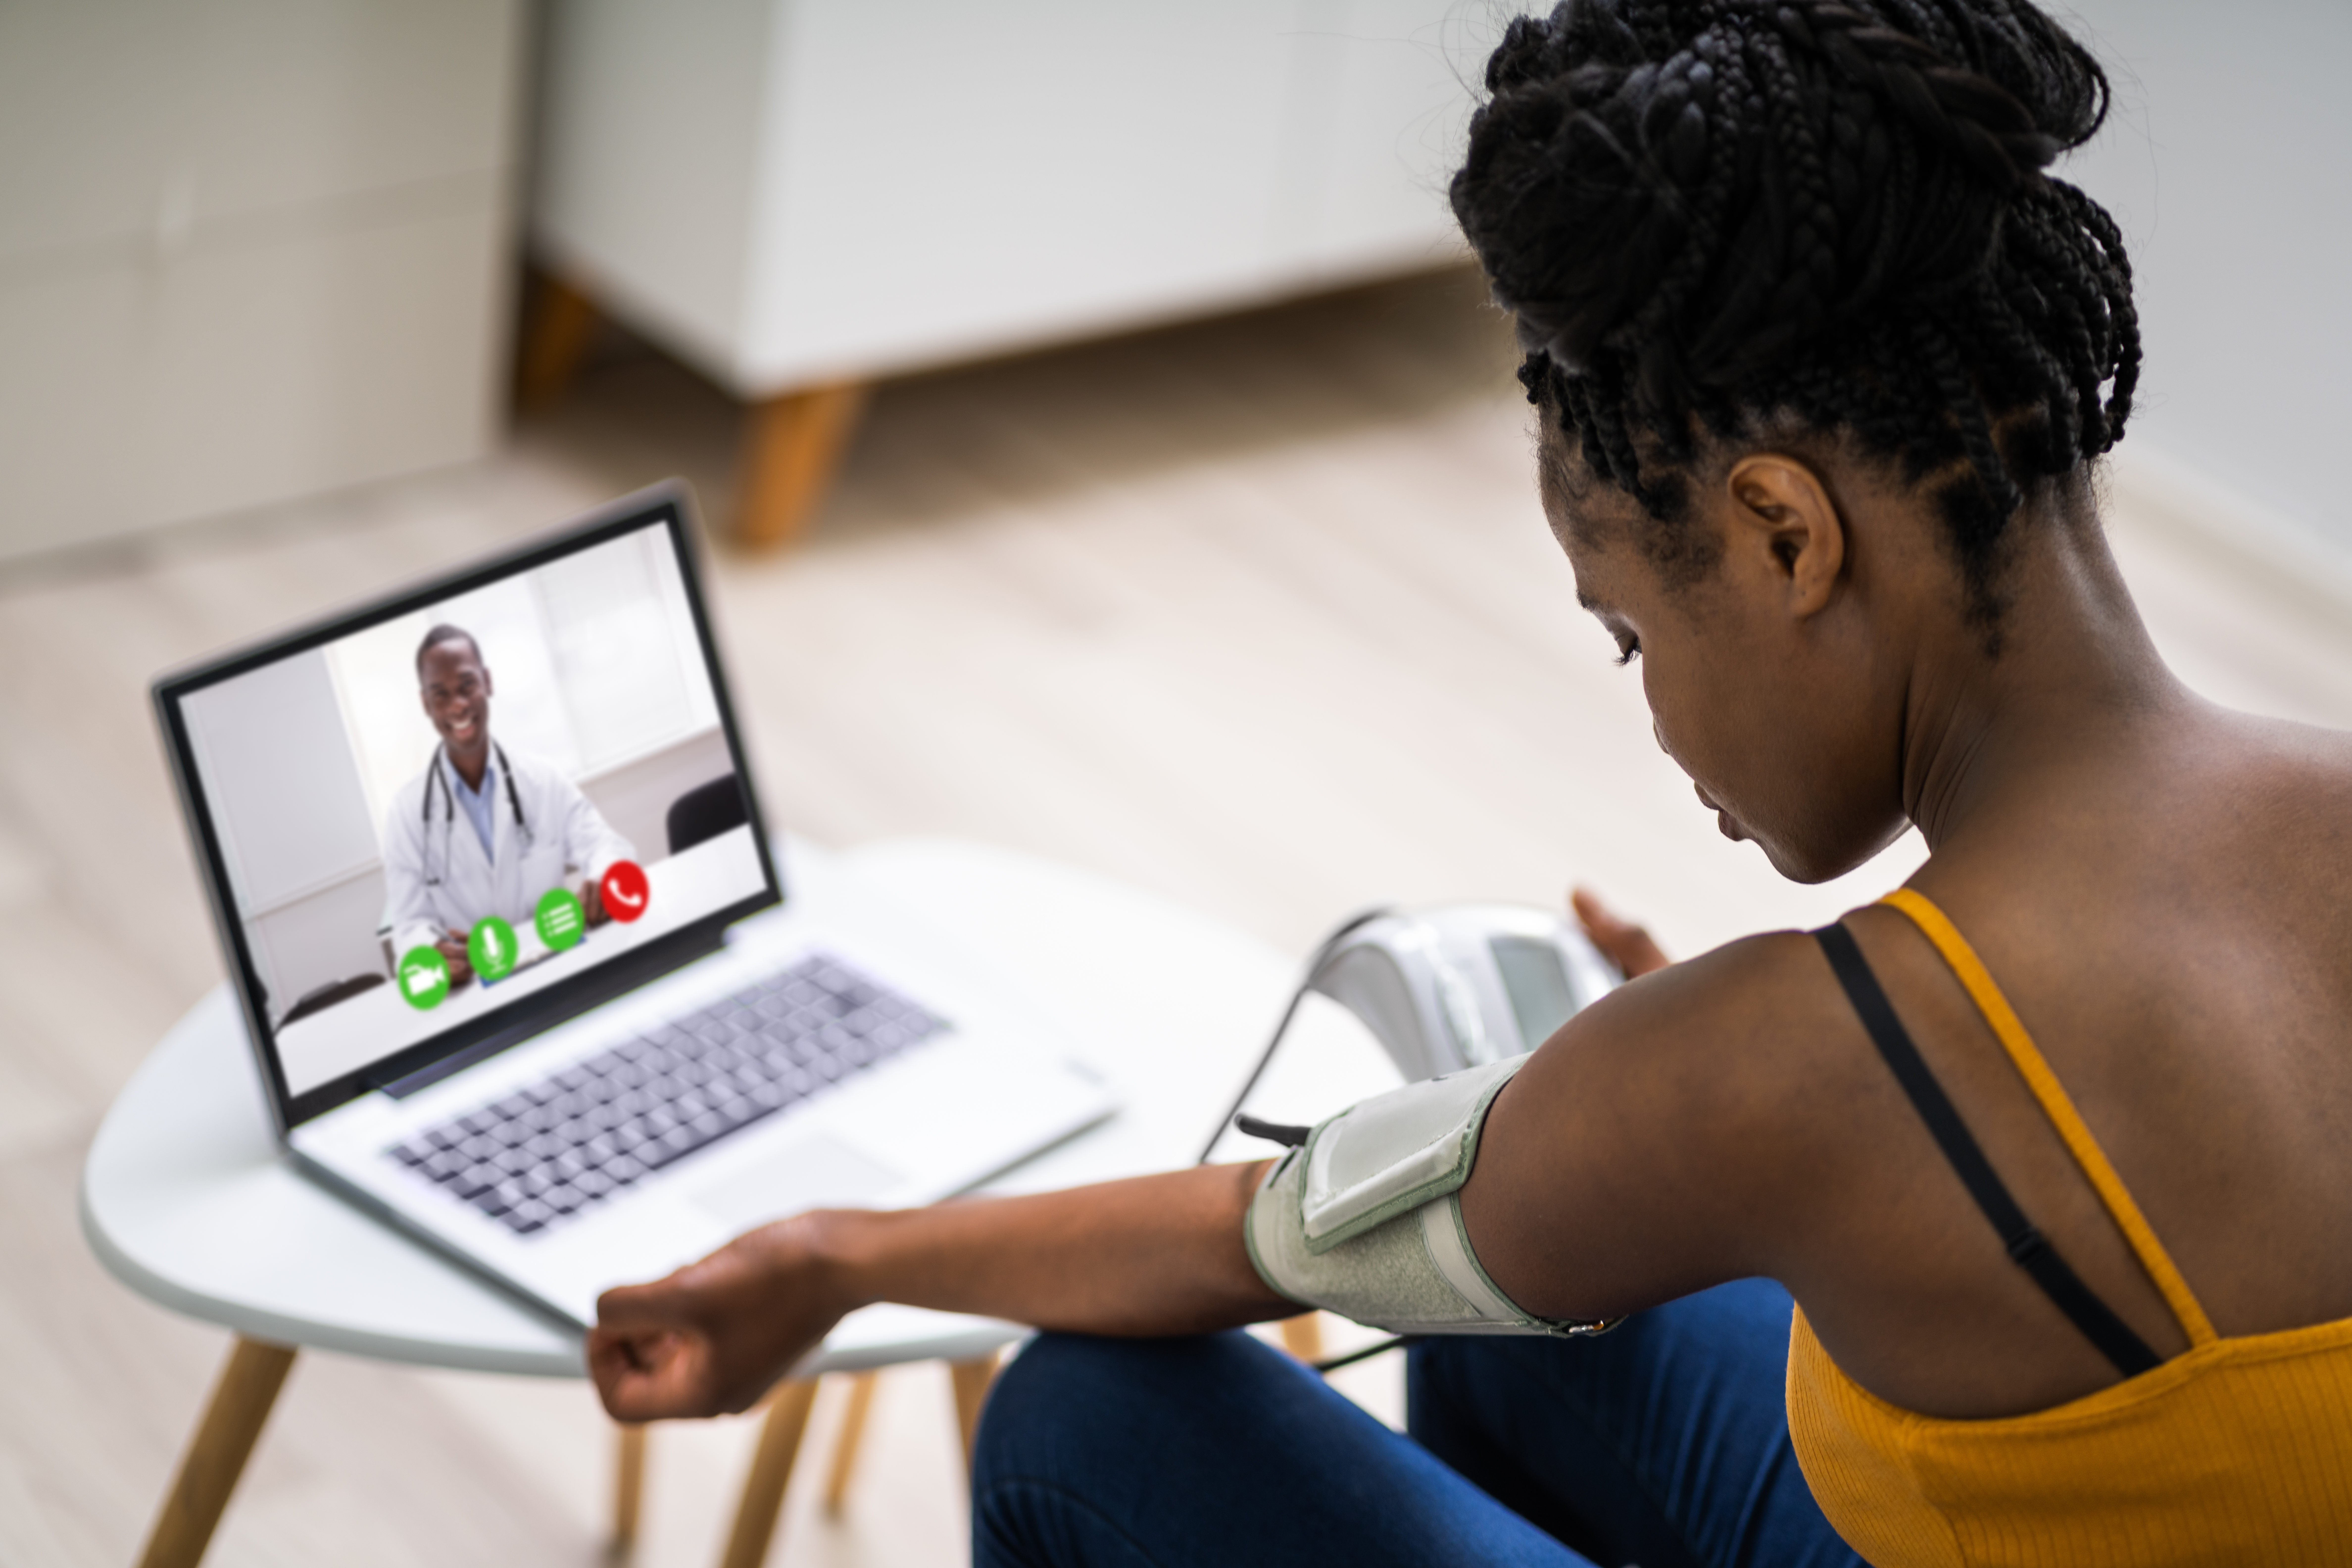 Telehealth is here to stay with even physical therapy practices opting to offer remote consultations.